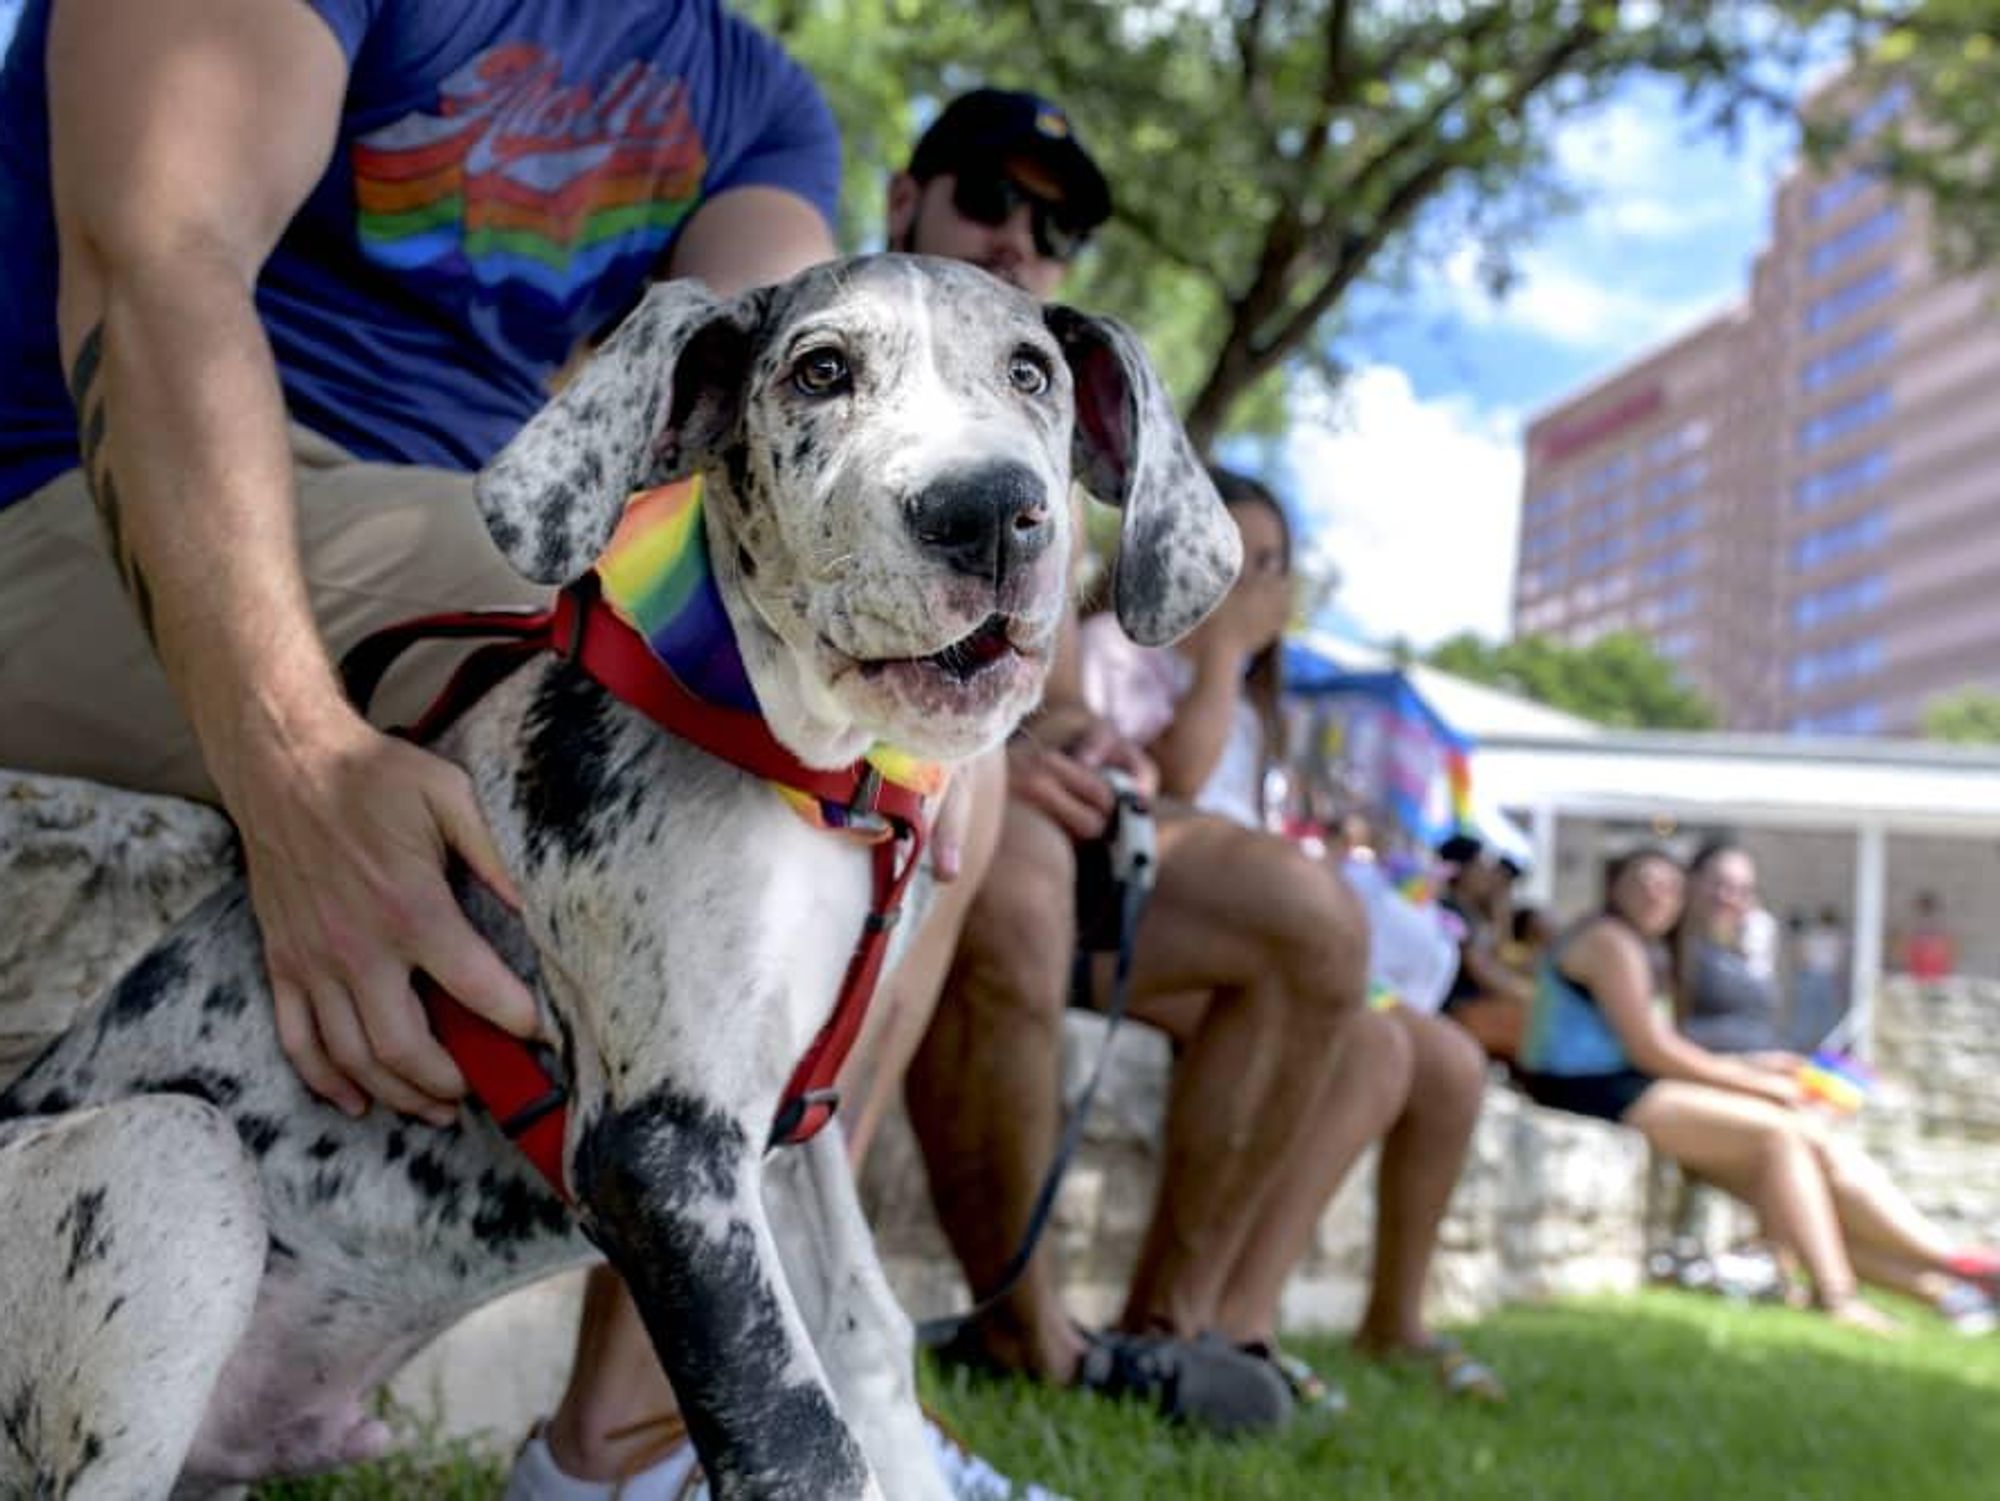 A dog wearing a Pride bandanna sits with people at a park.